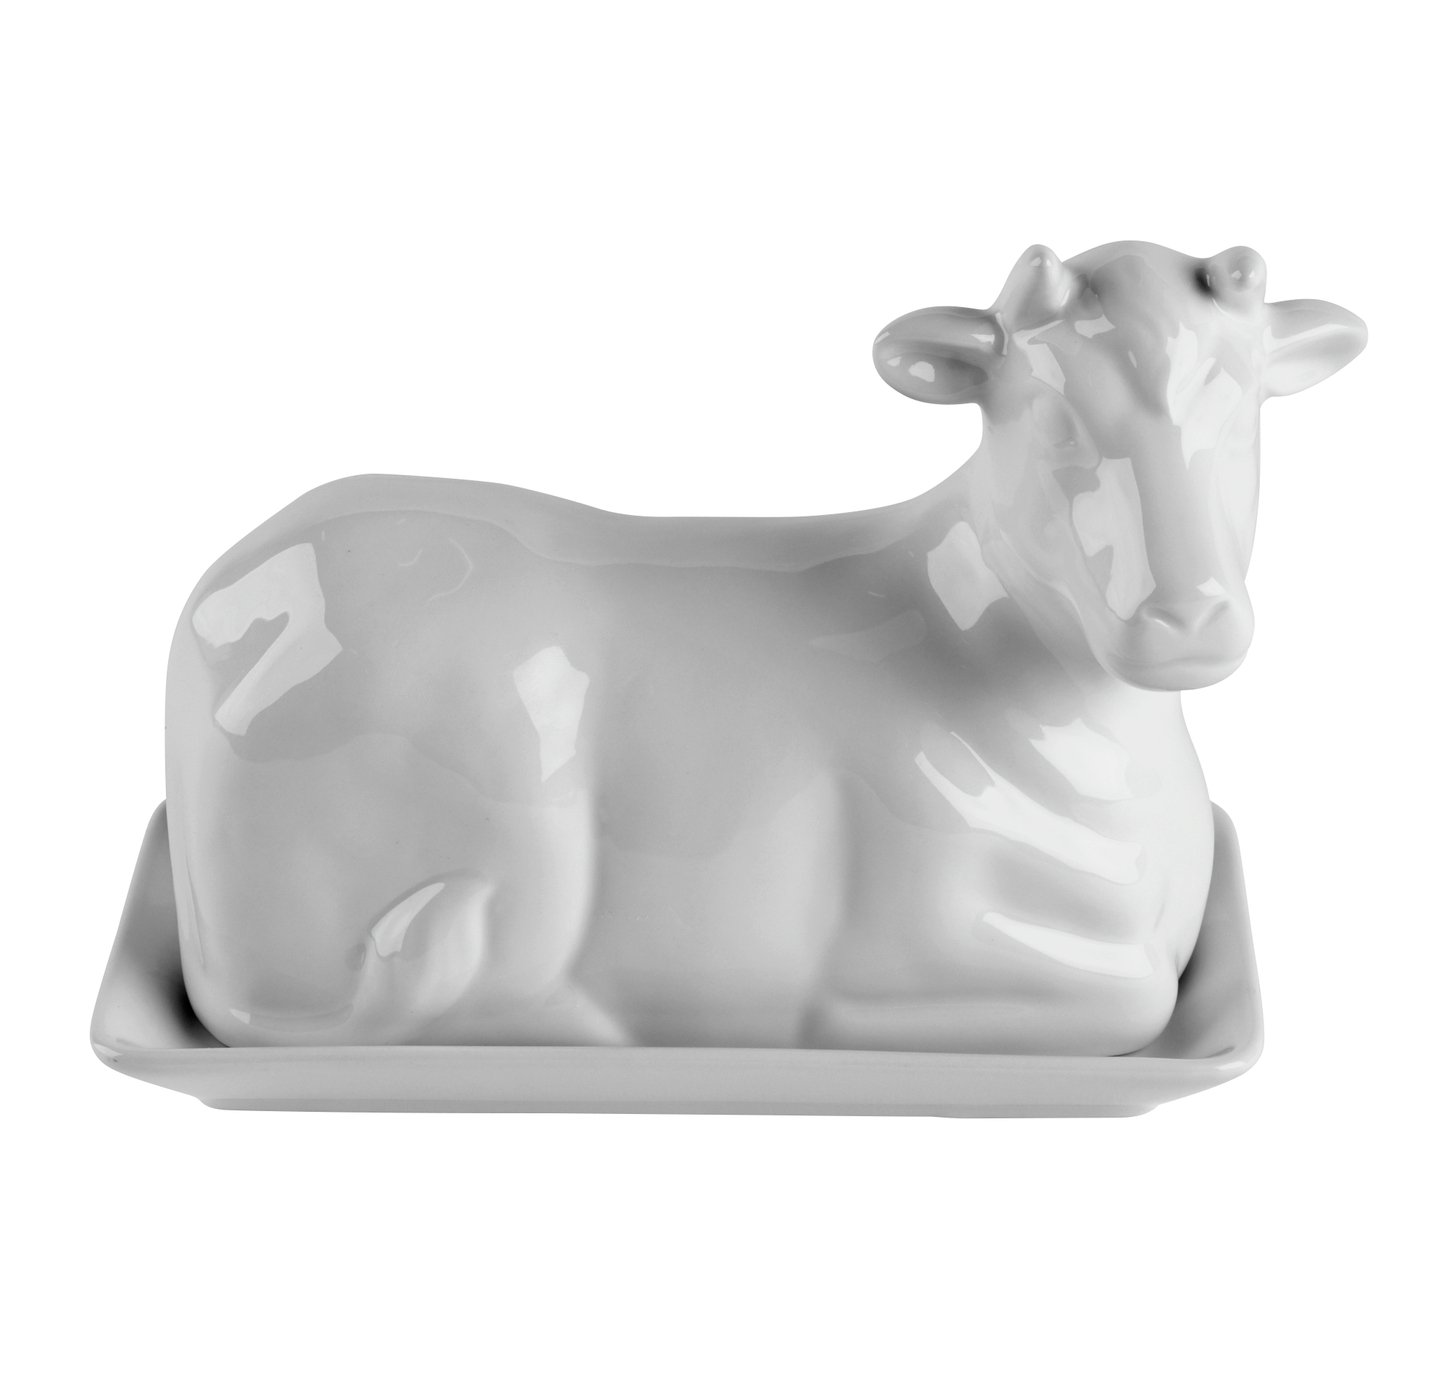 Sainsbury's Home Porcelain Cow Butter Dish - White